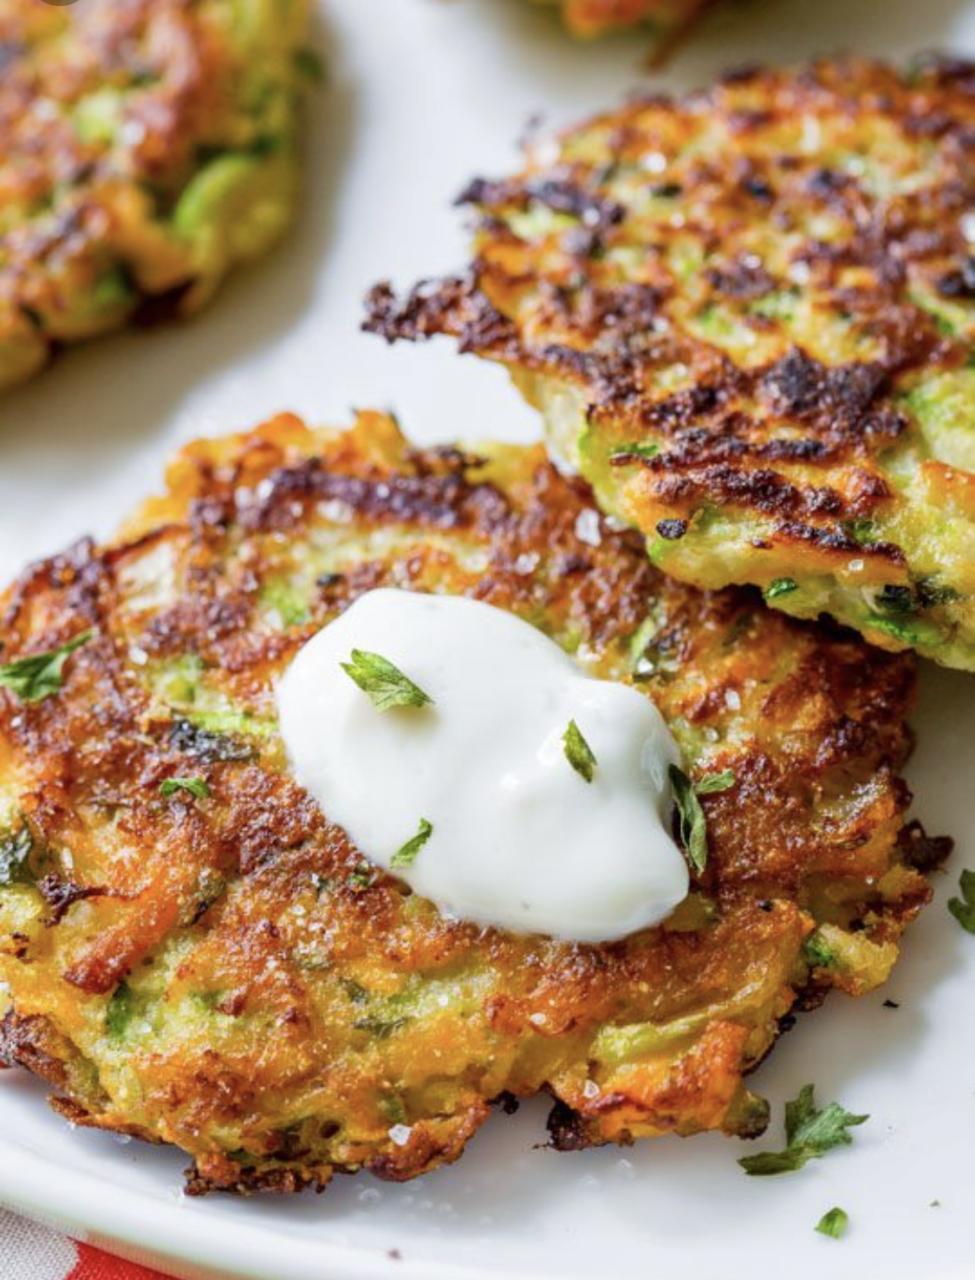 Crunchy Zucchini Fritters With Avocado Dill Dip | Hamptons Moms